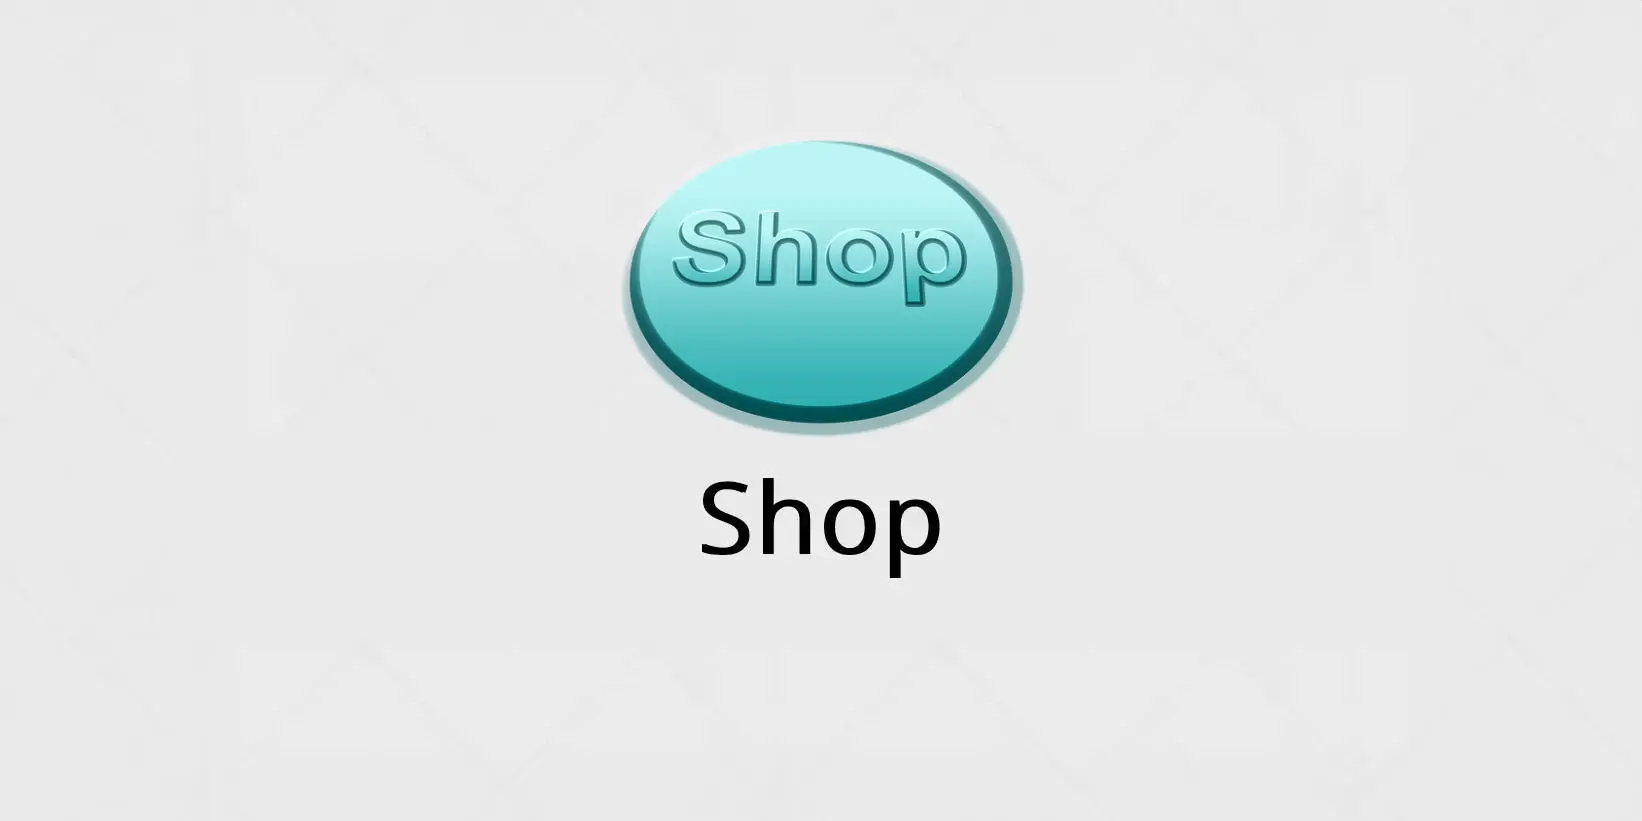 A button that says shop on it.